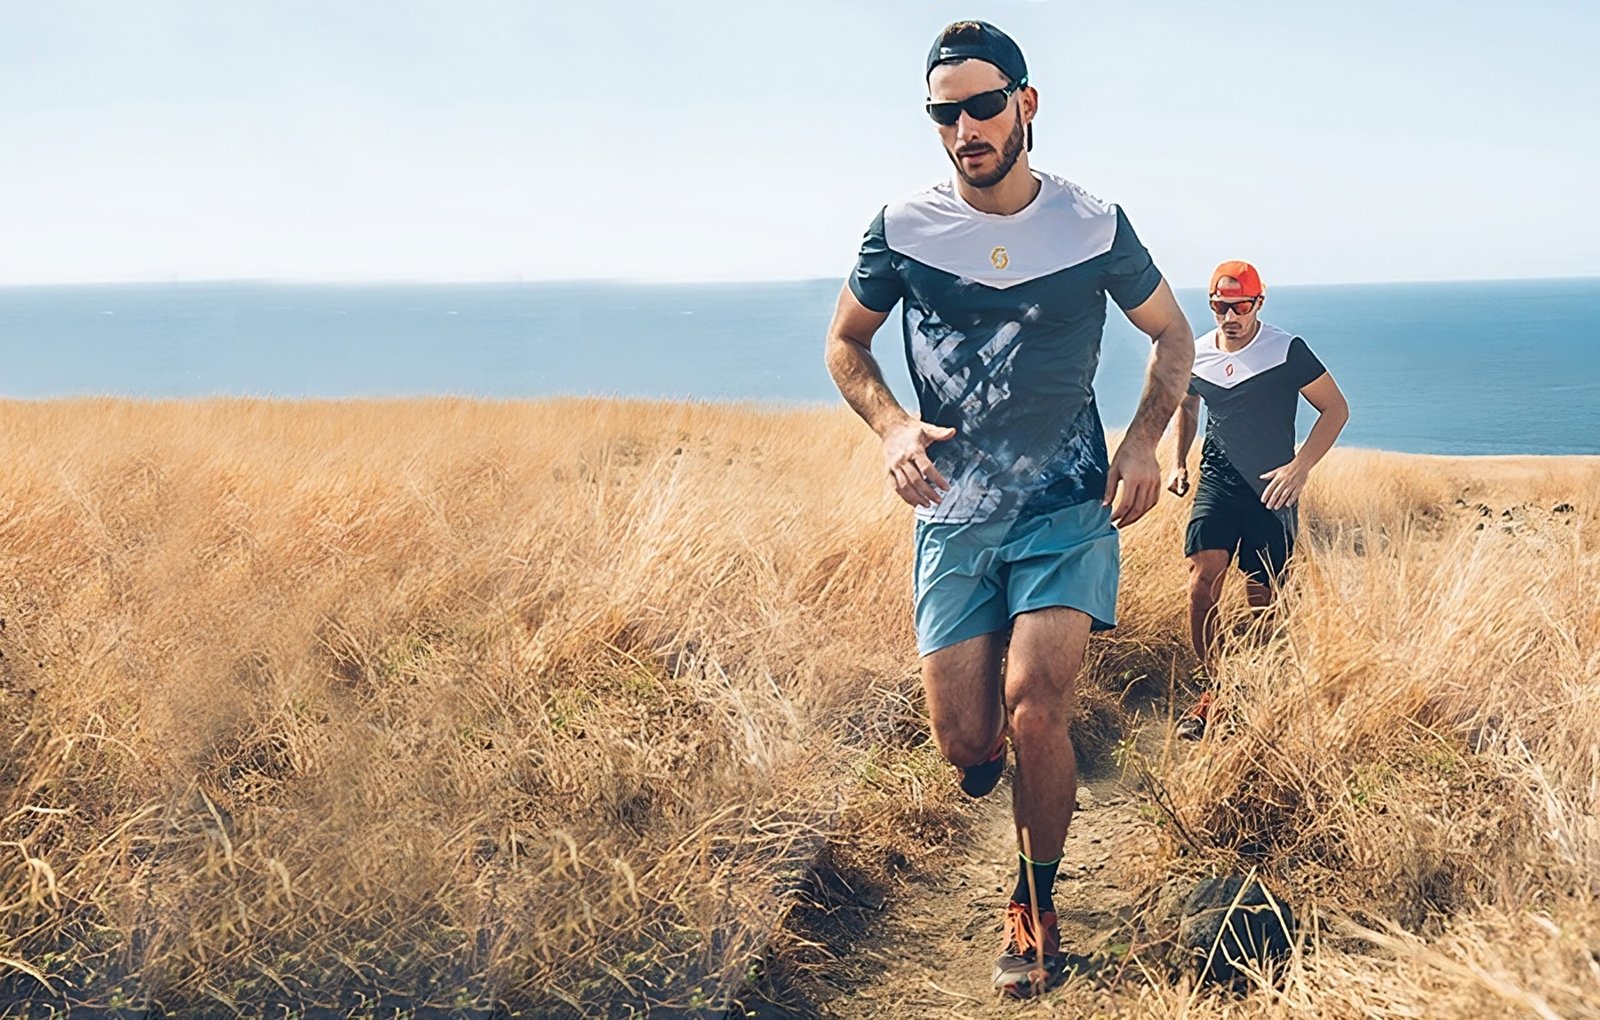 Men running together with Anchor Sunglasses Straps on a sunny day by the ocean.